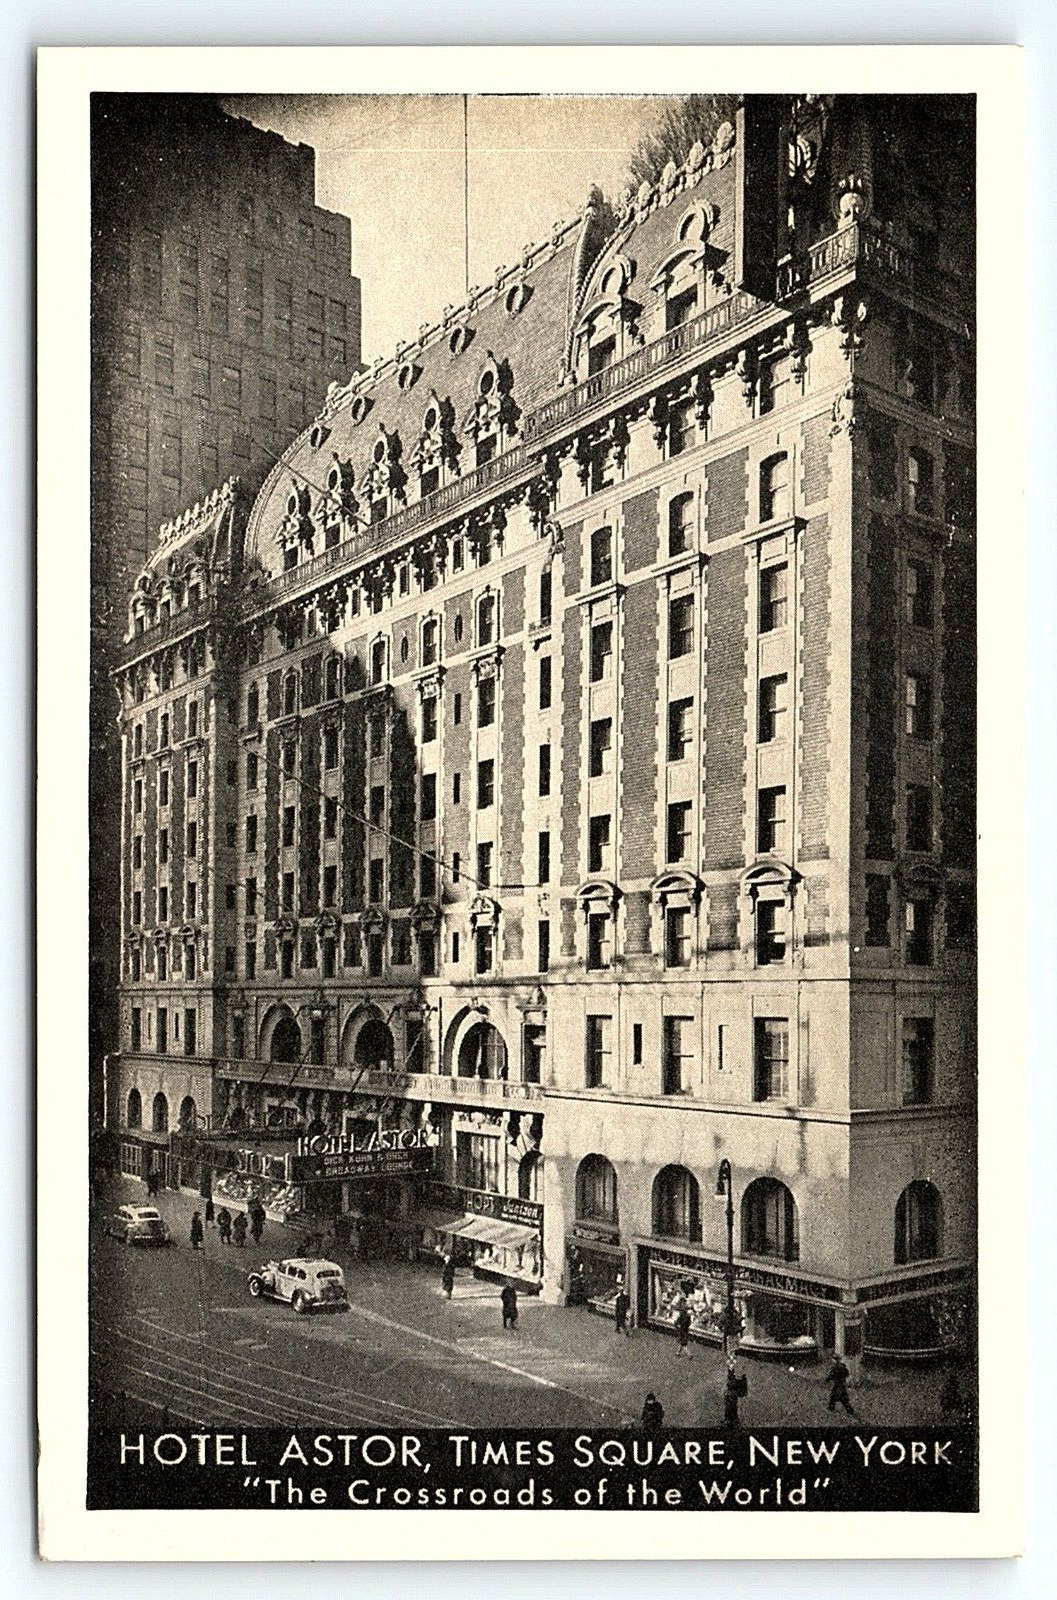 1920s TIMES SQUARE NEW YORK HOTEL ASTOR CROSSROADS OF THE WORLD POSTCARD 46-108